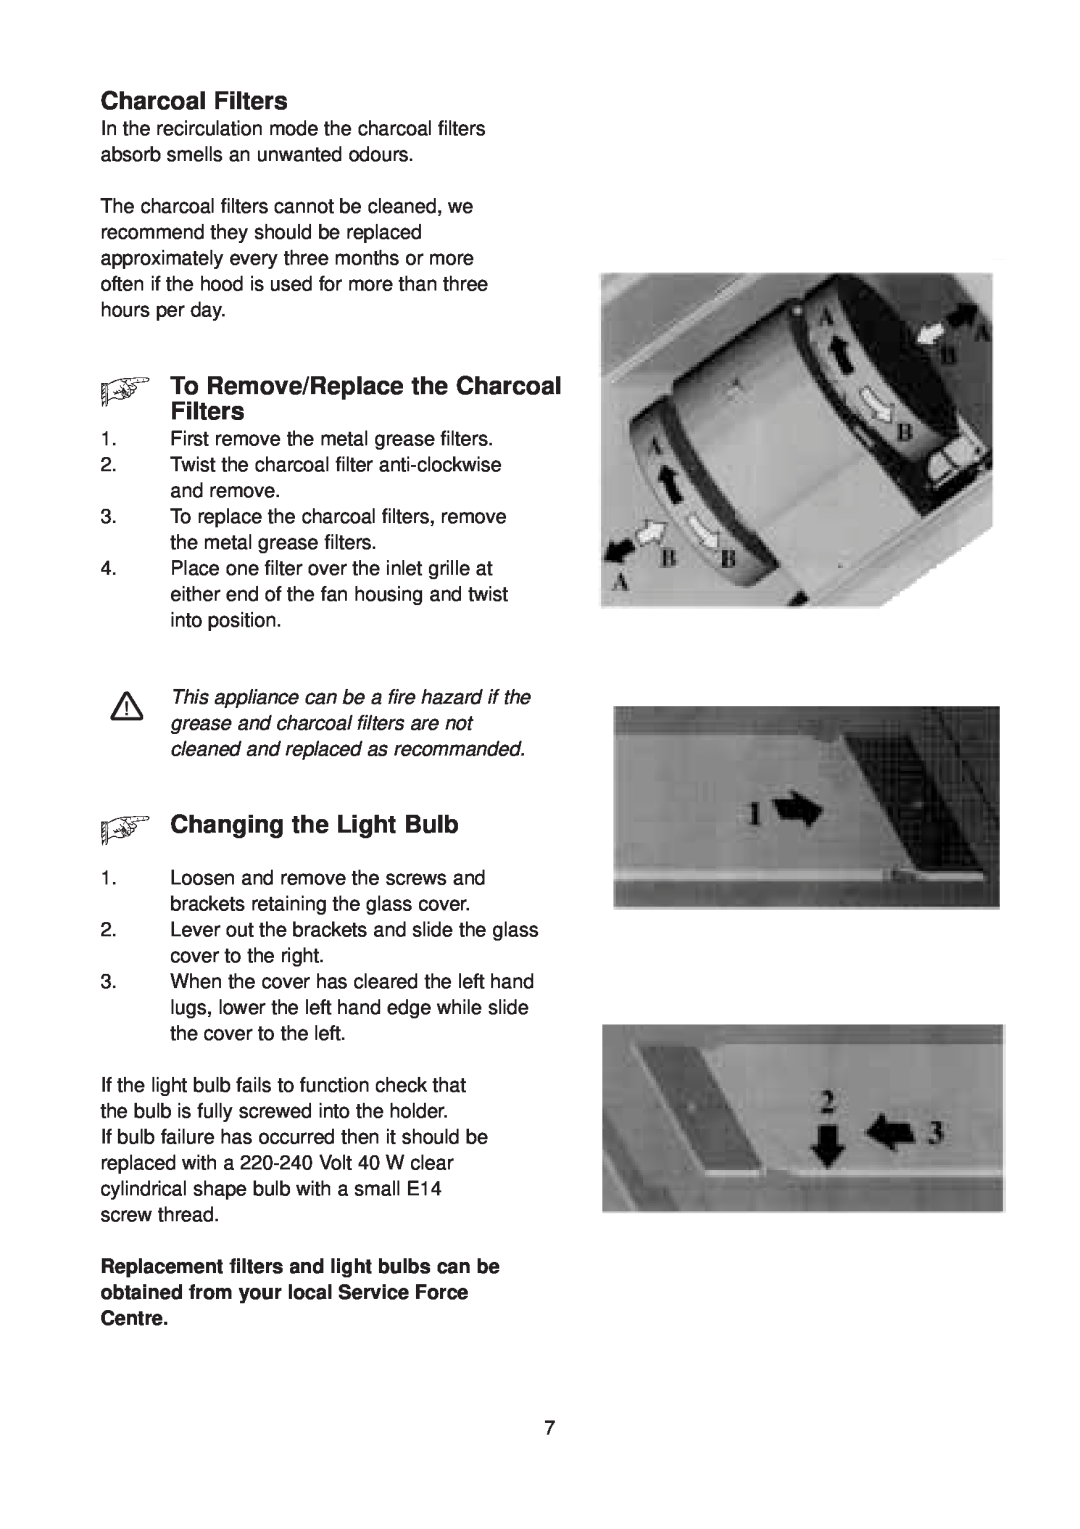 Electrolux EFC 630 manual K To Remove/Replace the Charcoal Filters, K Changing the Light Bulb 